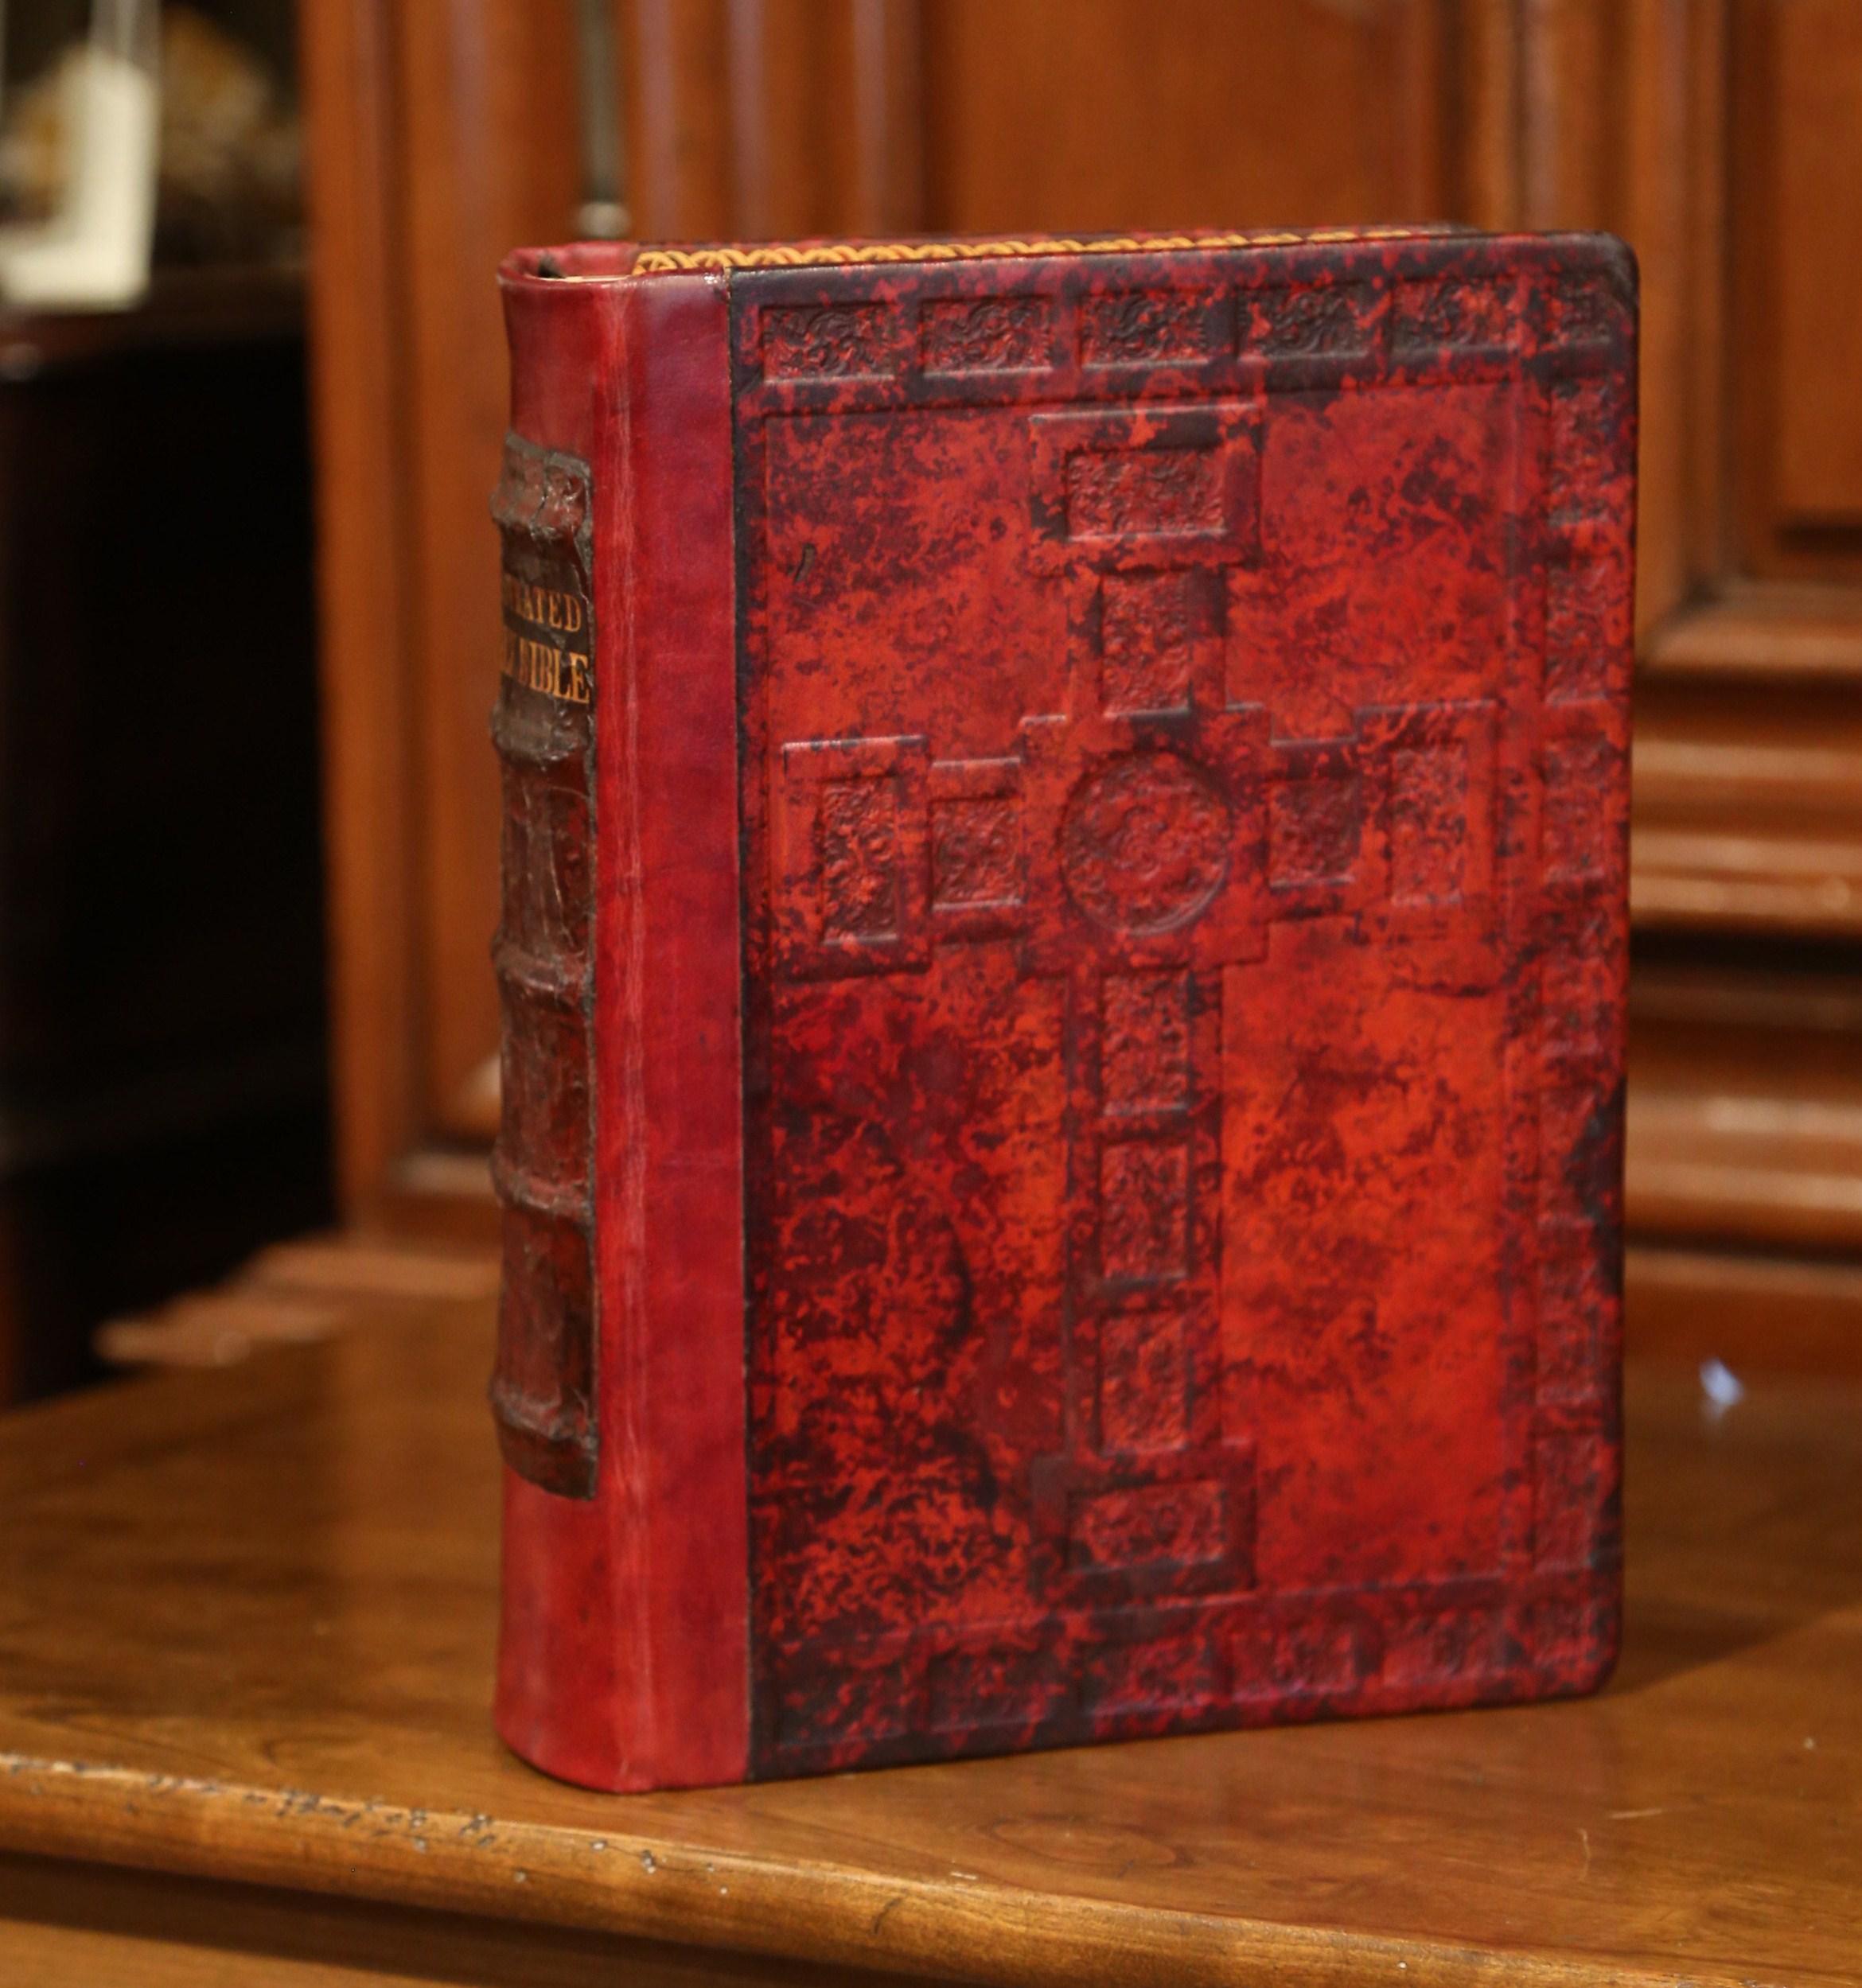 This beautiful antique Bible was printed in Sweden and distributed by Gothic Press Incorporated in New York. Printed circa 1930, the illustrated family Bible King James version with old and new testament, features a red leather hardback with gold